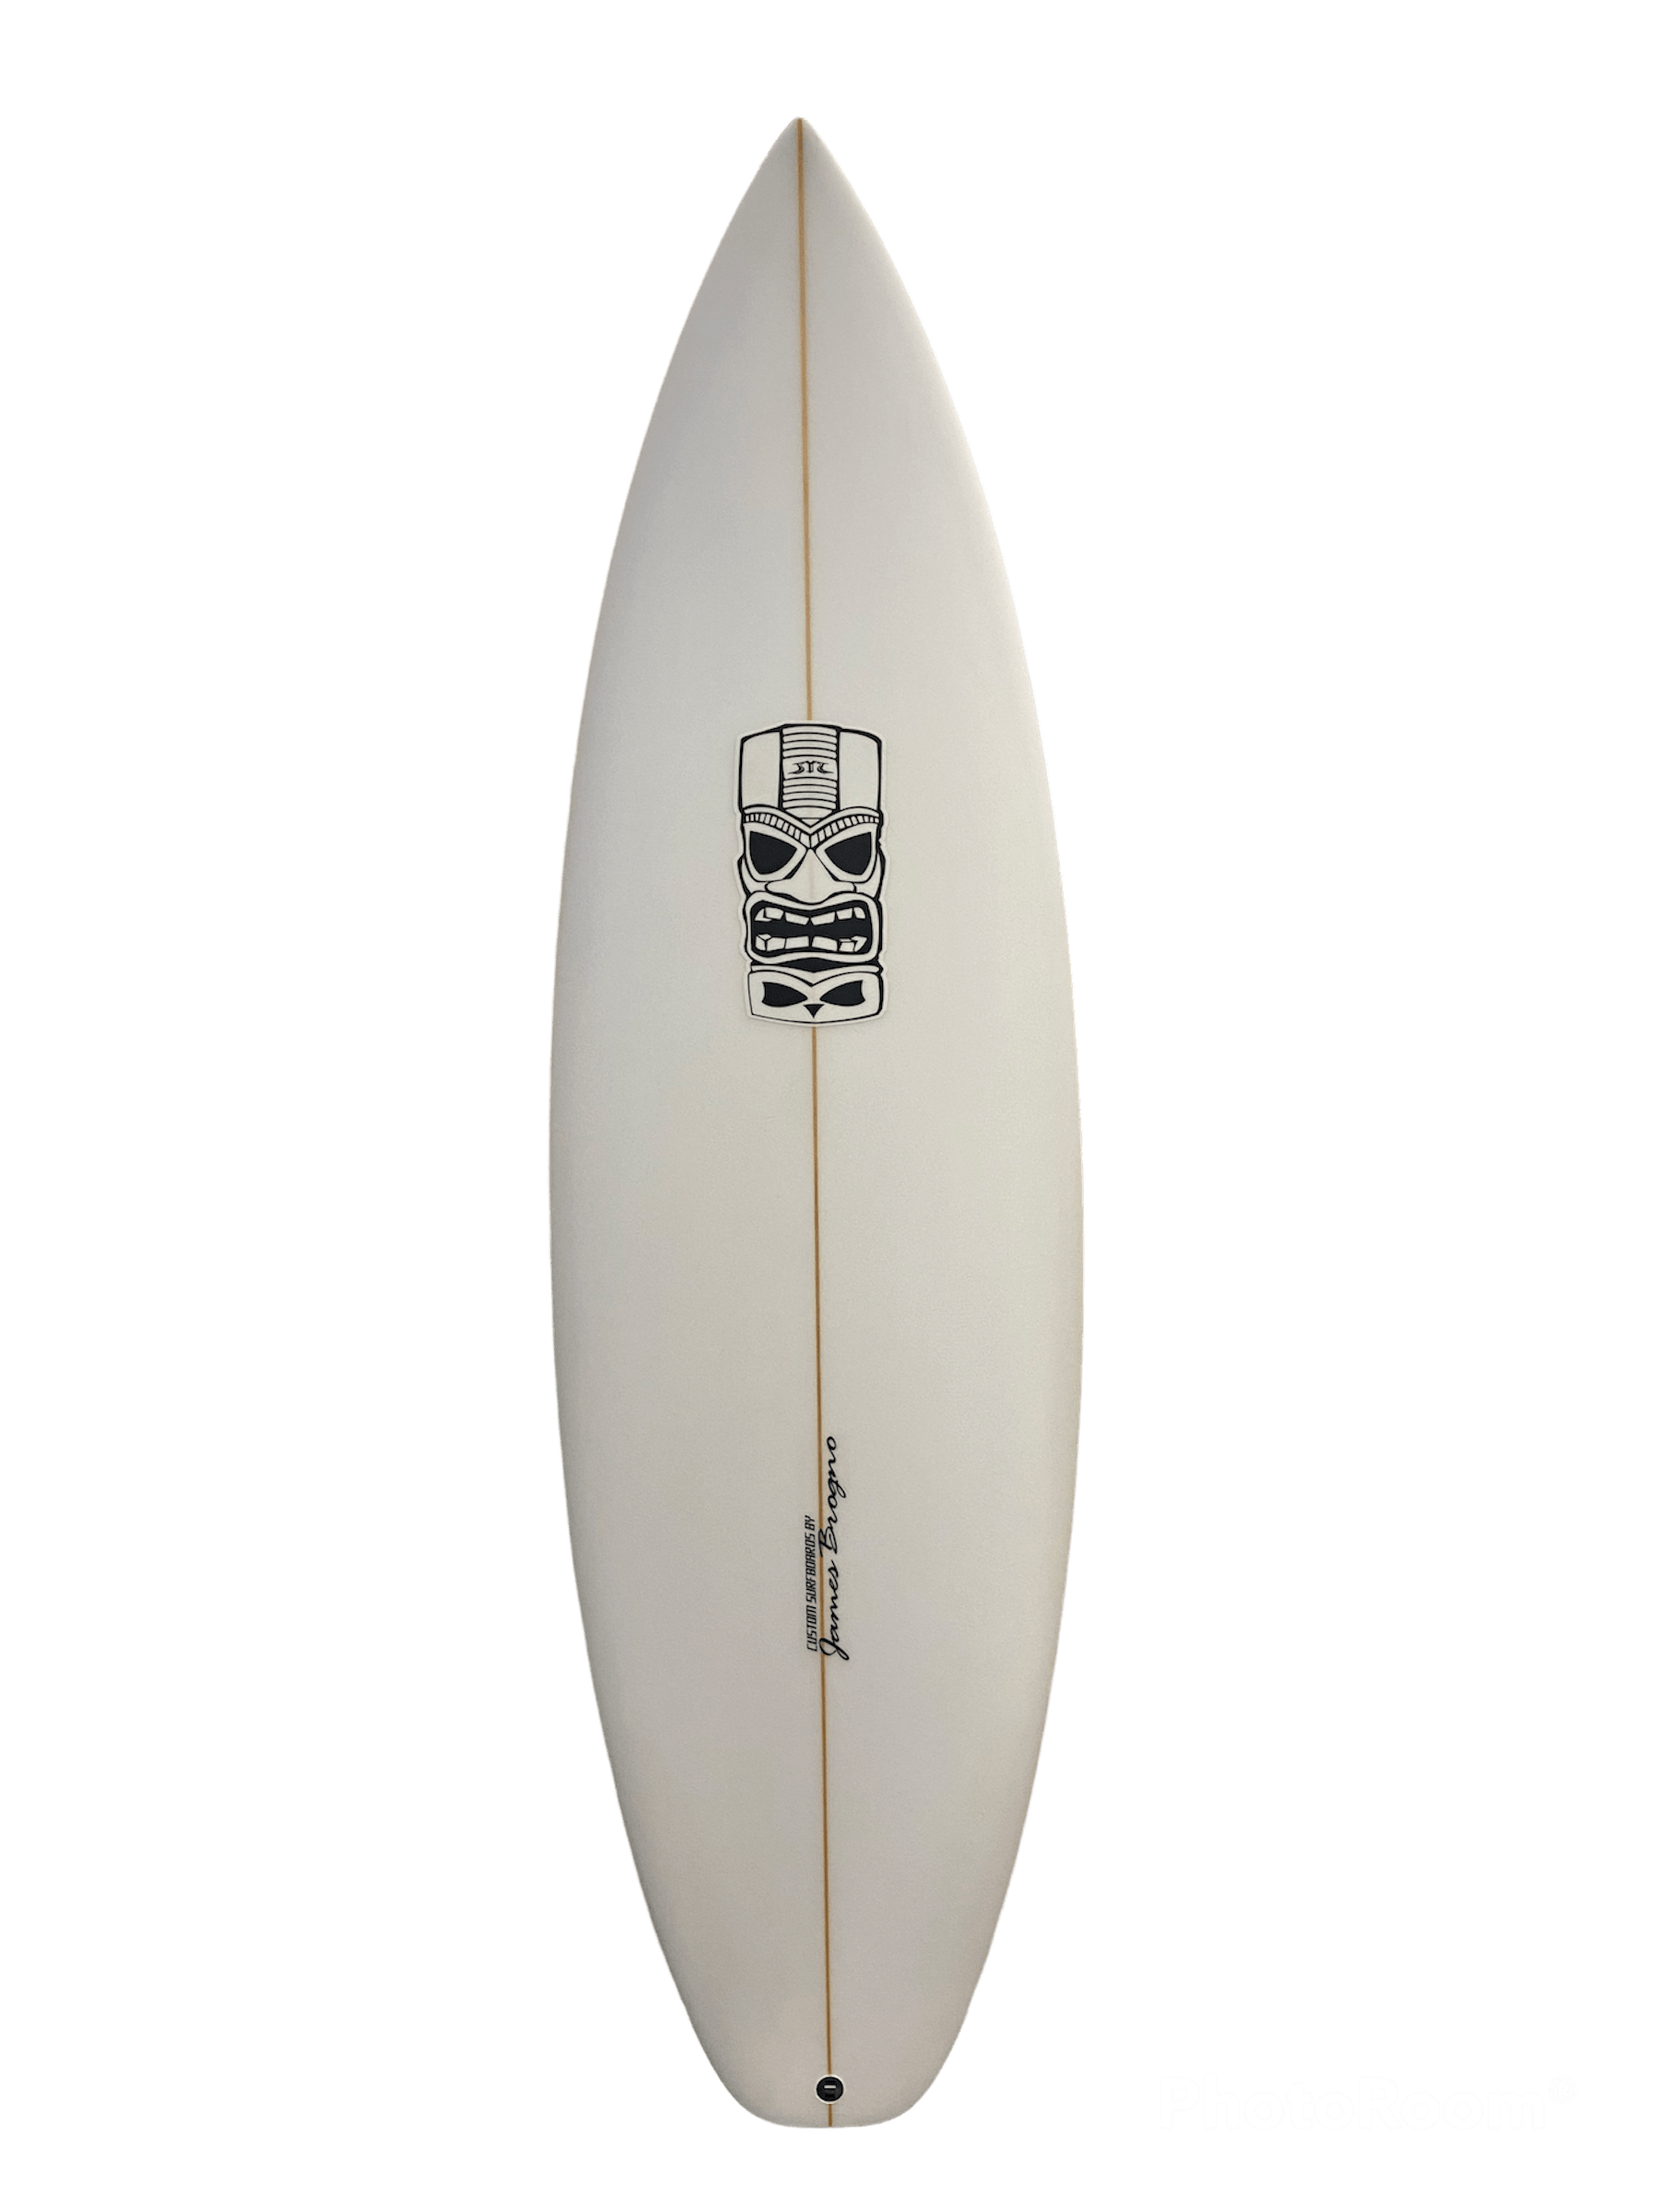 5'8 Muzzy Squash Tail Short Board Surfboards